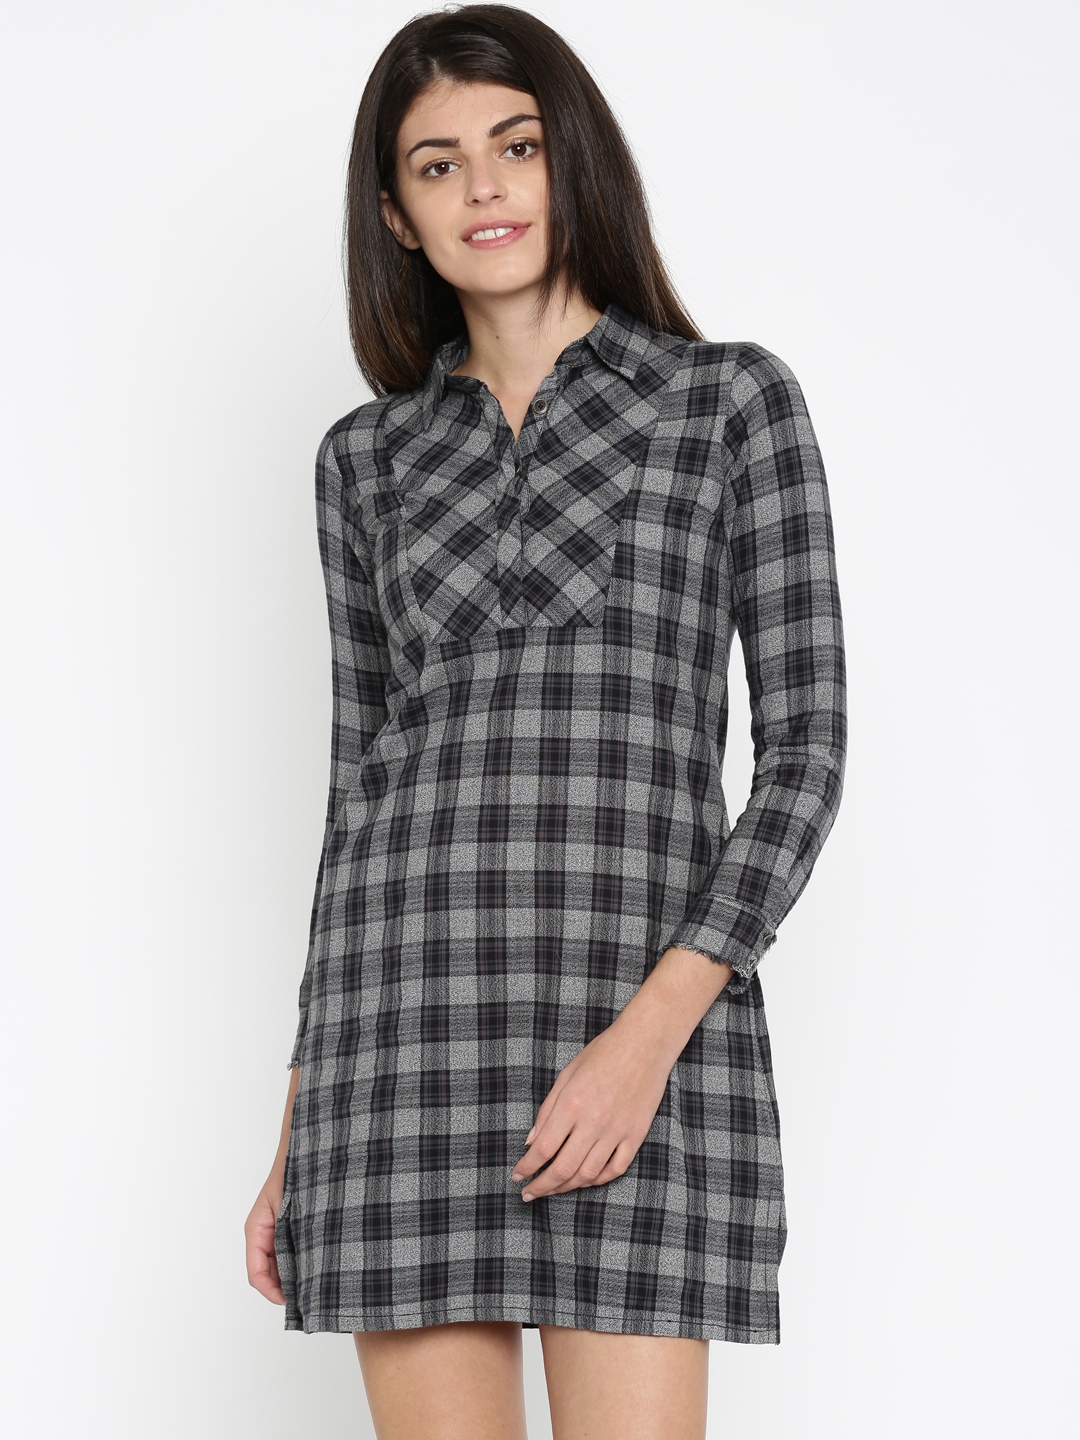 Buy AND Grey & Black Checked Shirt Dress - Dresses for Women 1576382 ...